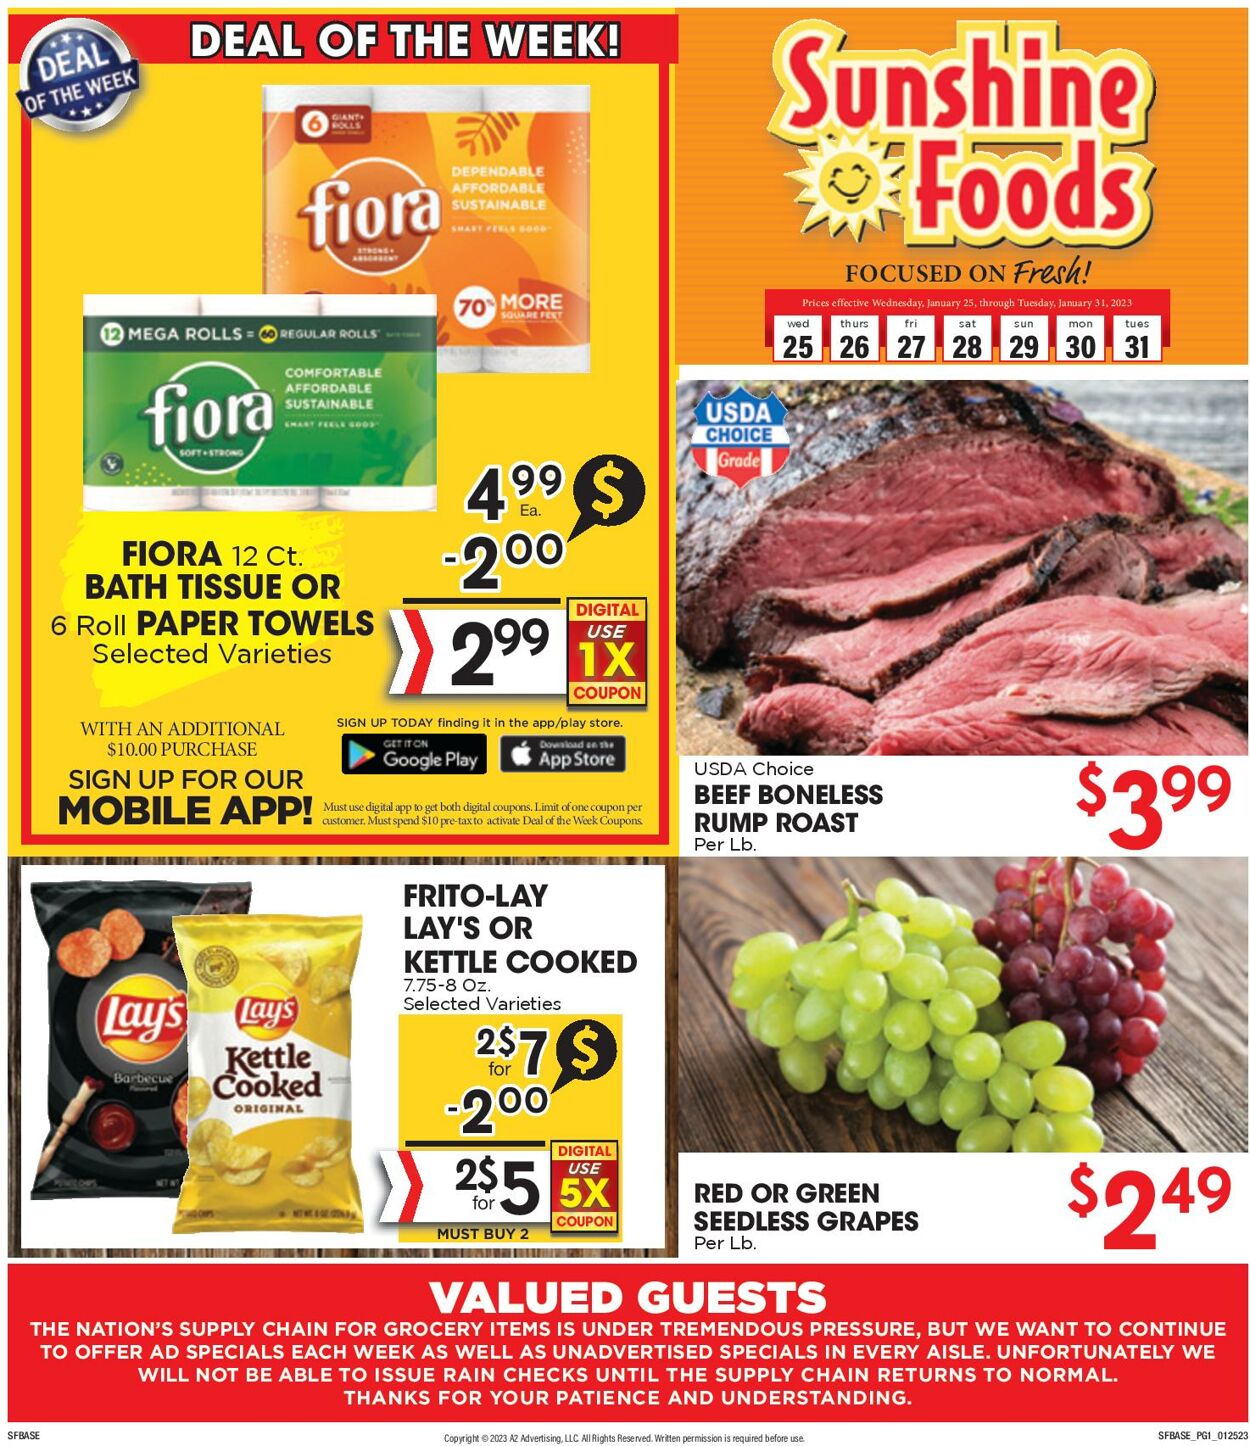 Sunshine Foods Promotional weekly ads